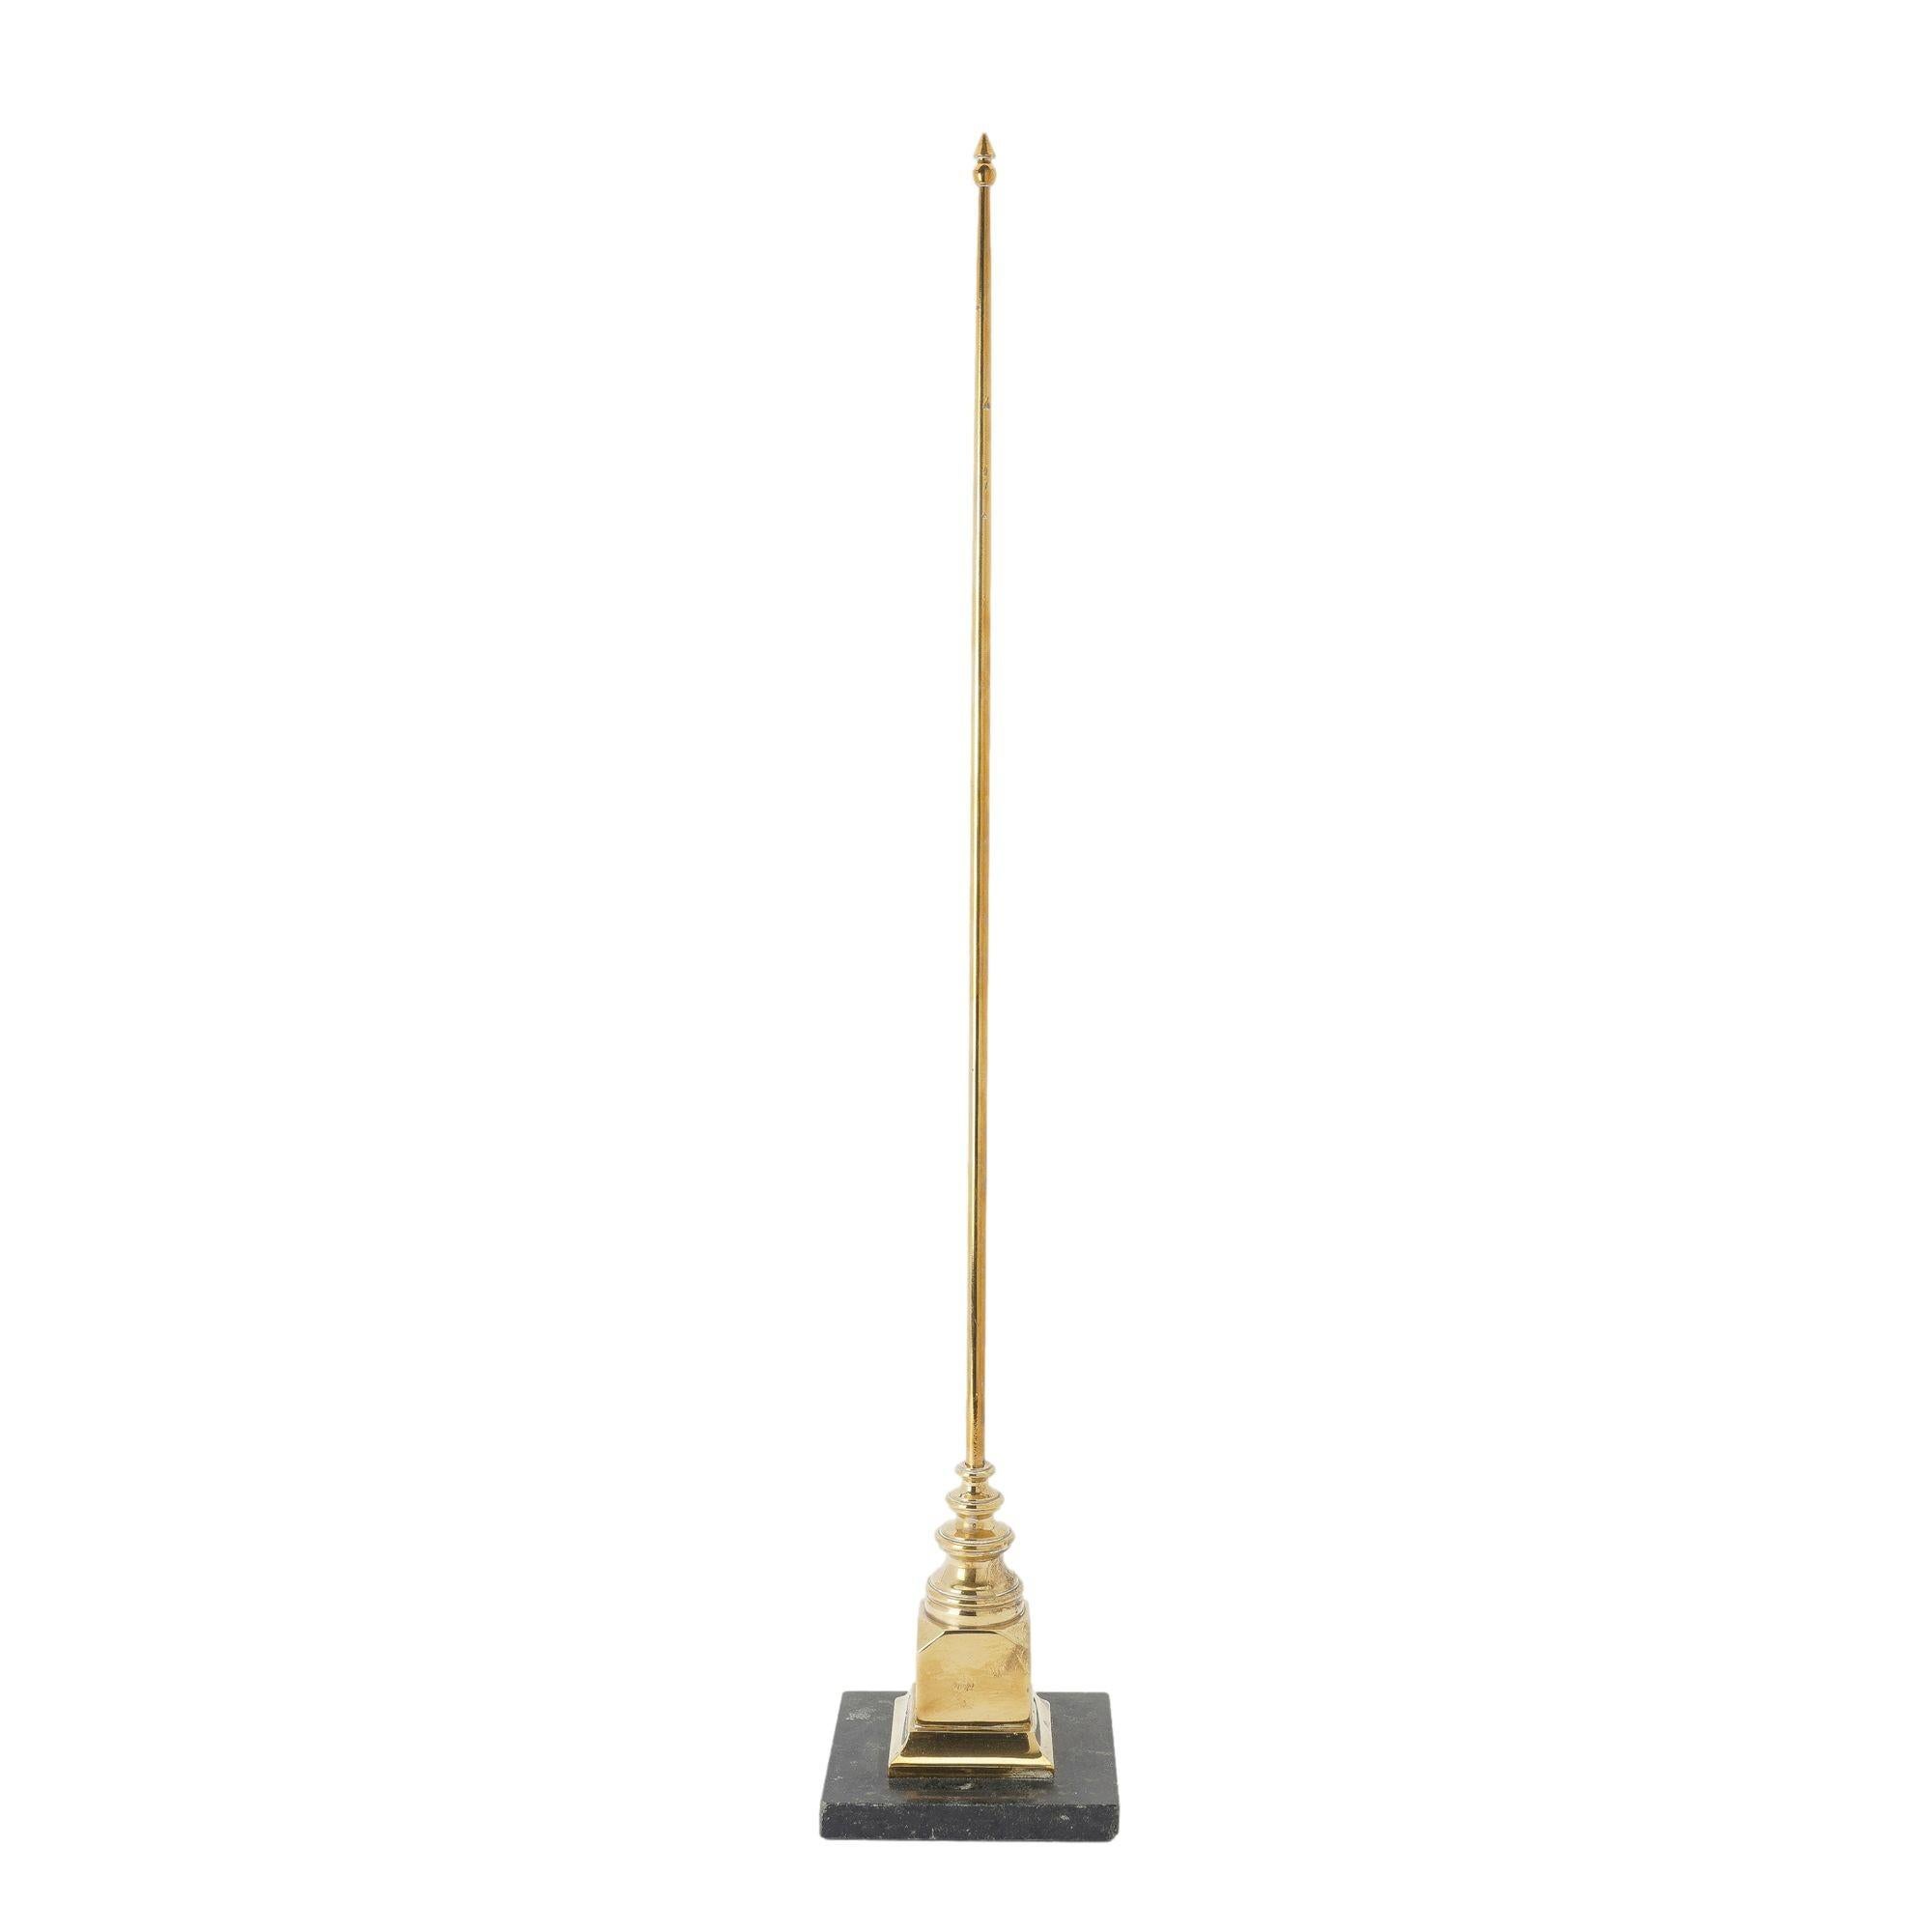 Cast brass yachting trophy in the form of a mast. The bottom of the column featured graduated ring turnings which rest on a square brass base and plinth and are mounted on a base of square black marble.

Sweden, circa 1950.